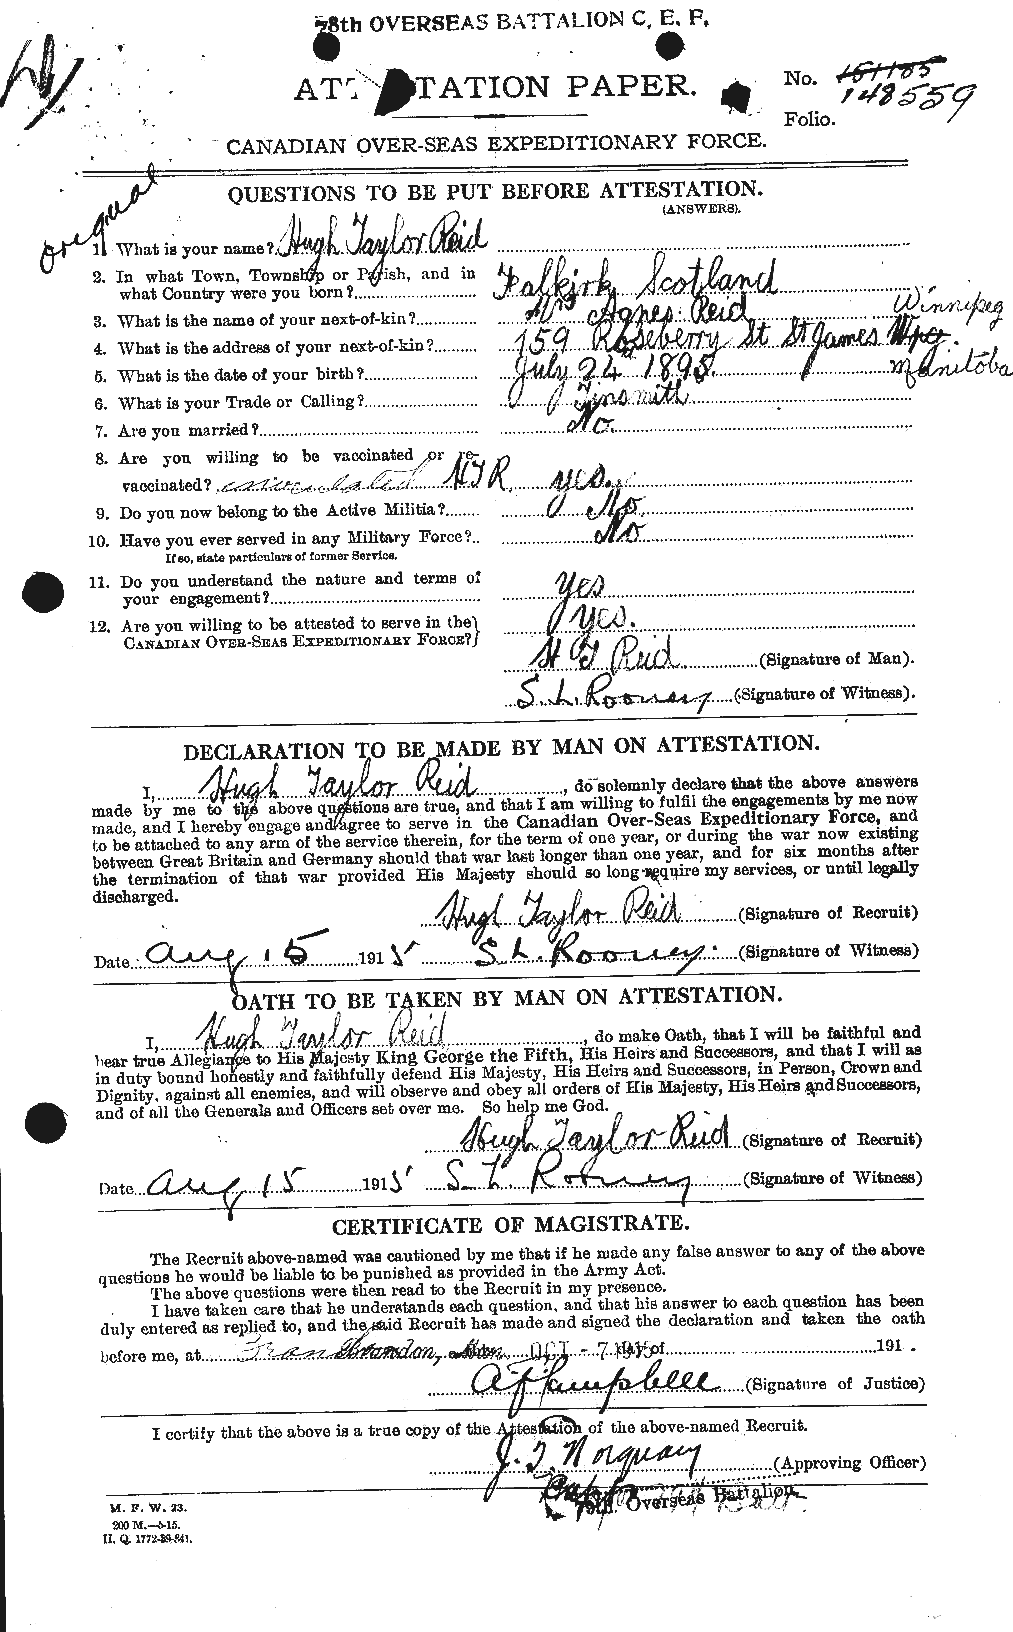 Personnel Records of the First World War - CEF 598630a